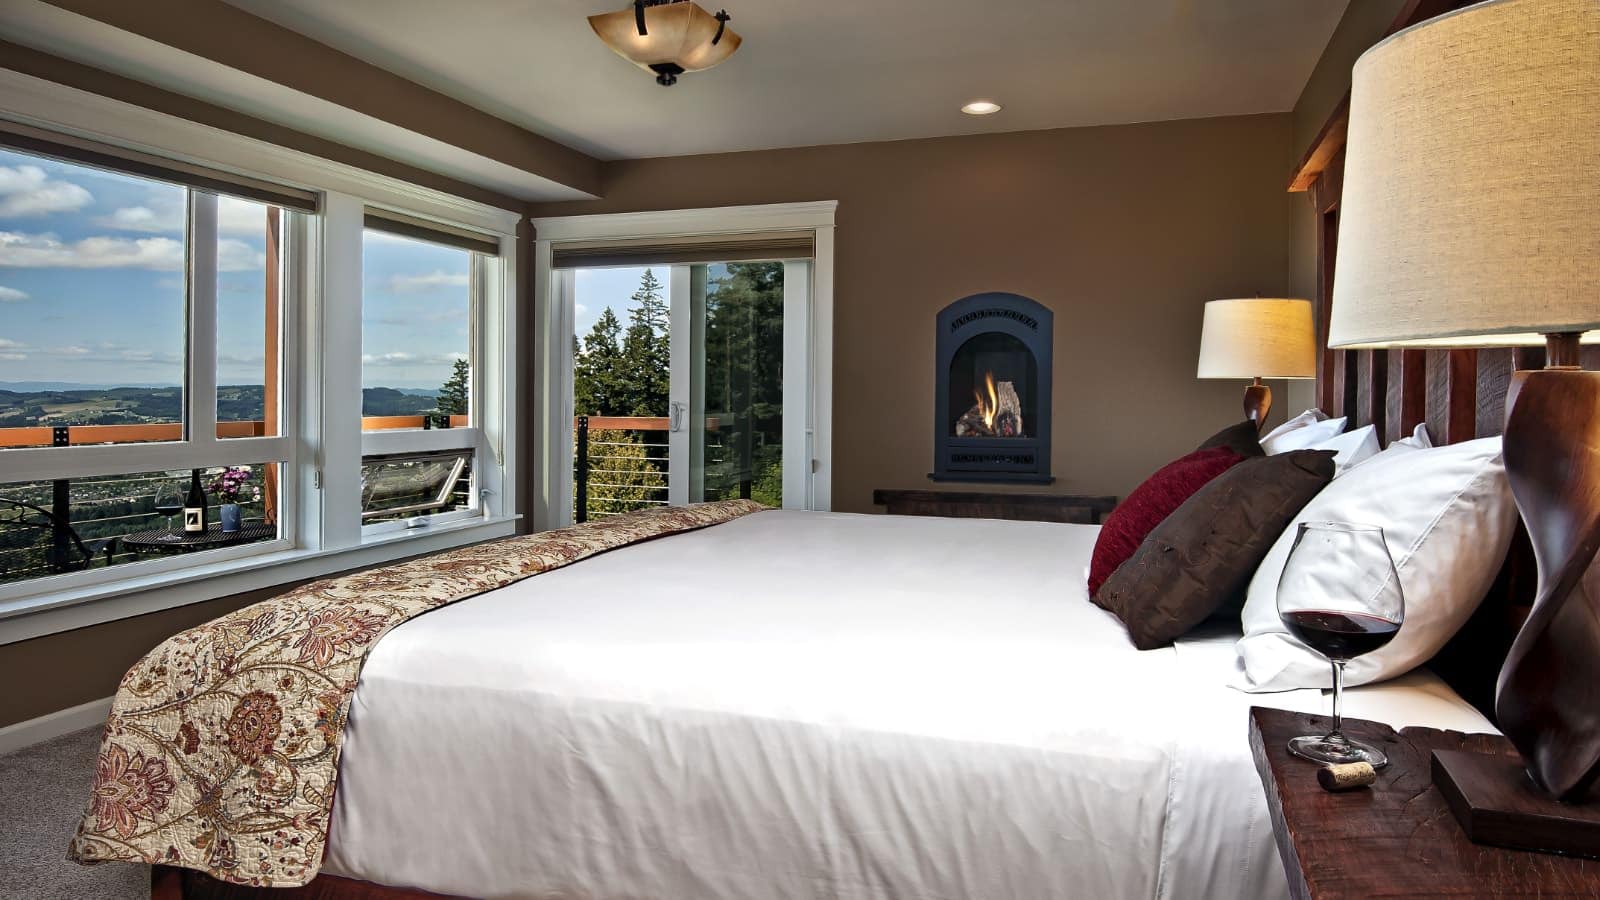 Bedroom with brown walls, white trim, carpeting, wooden bed, white bedding, and large windows with views of the area